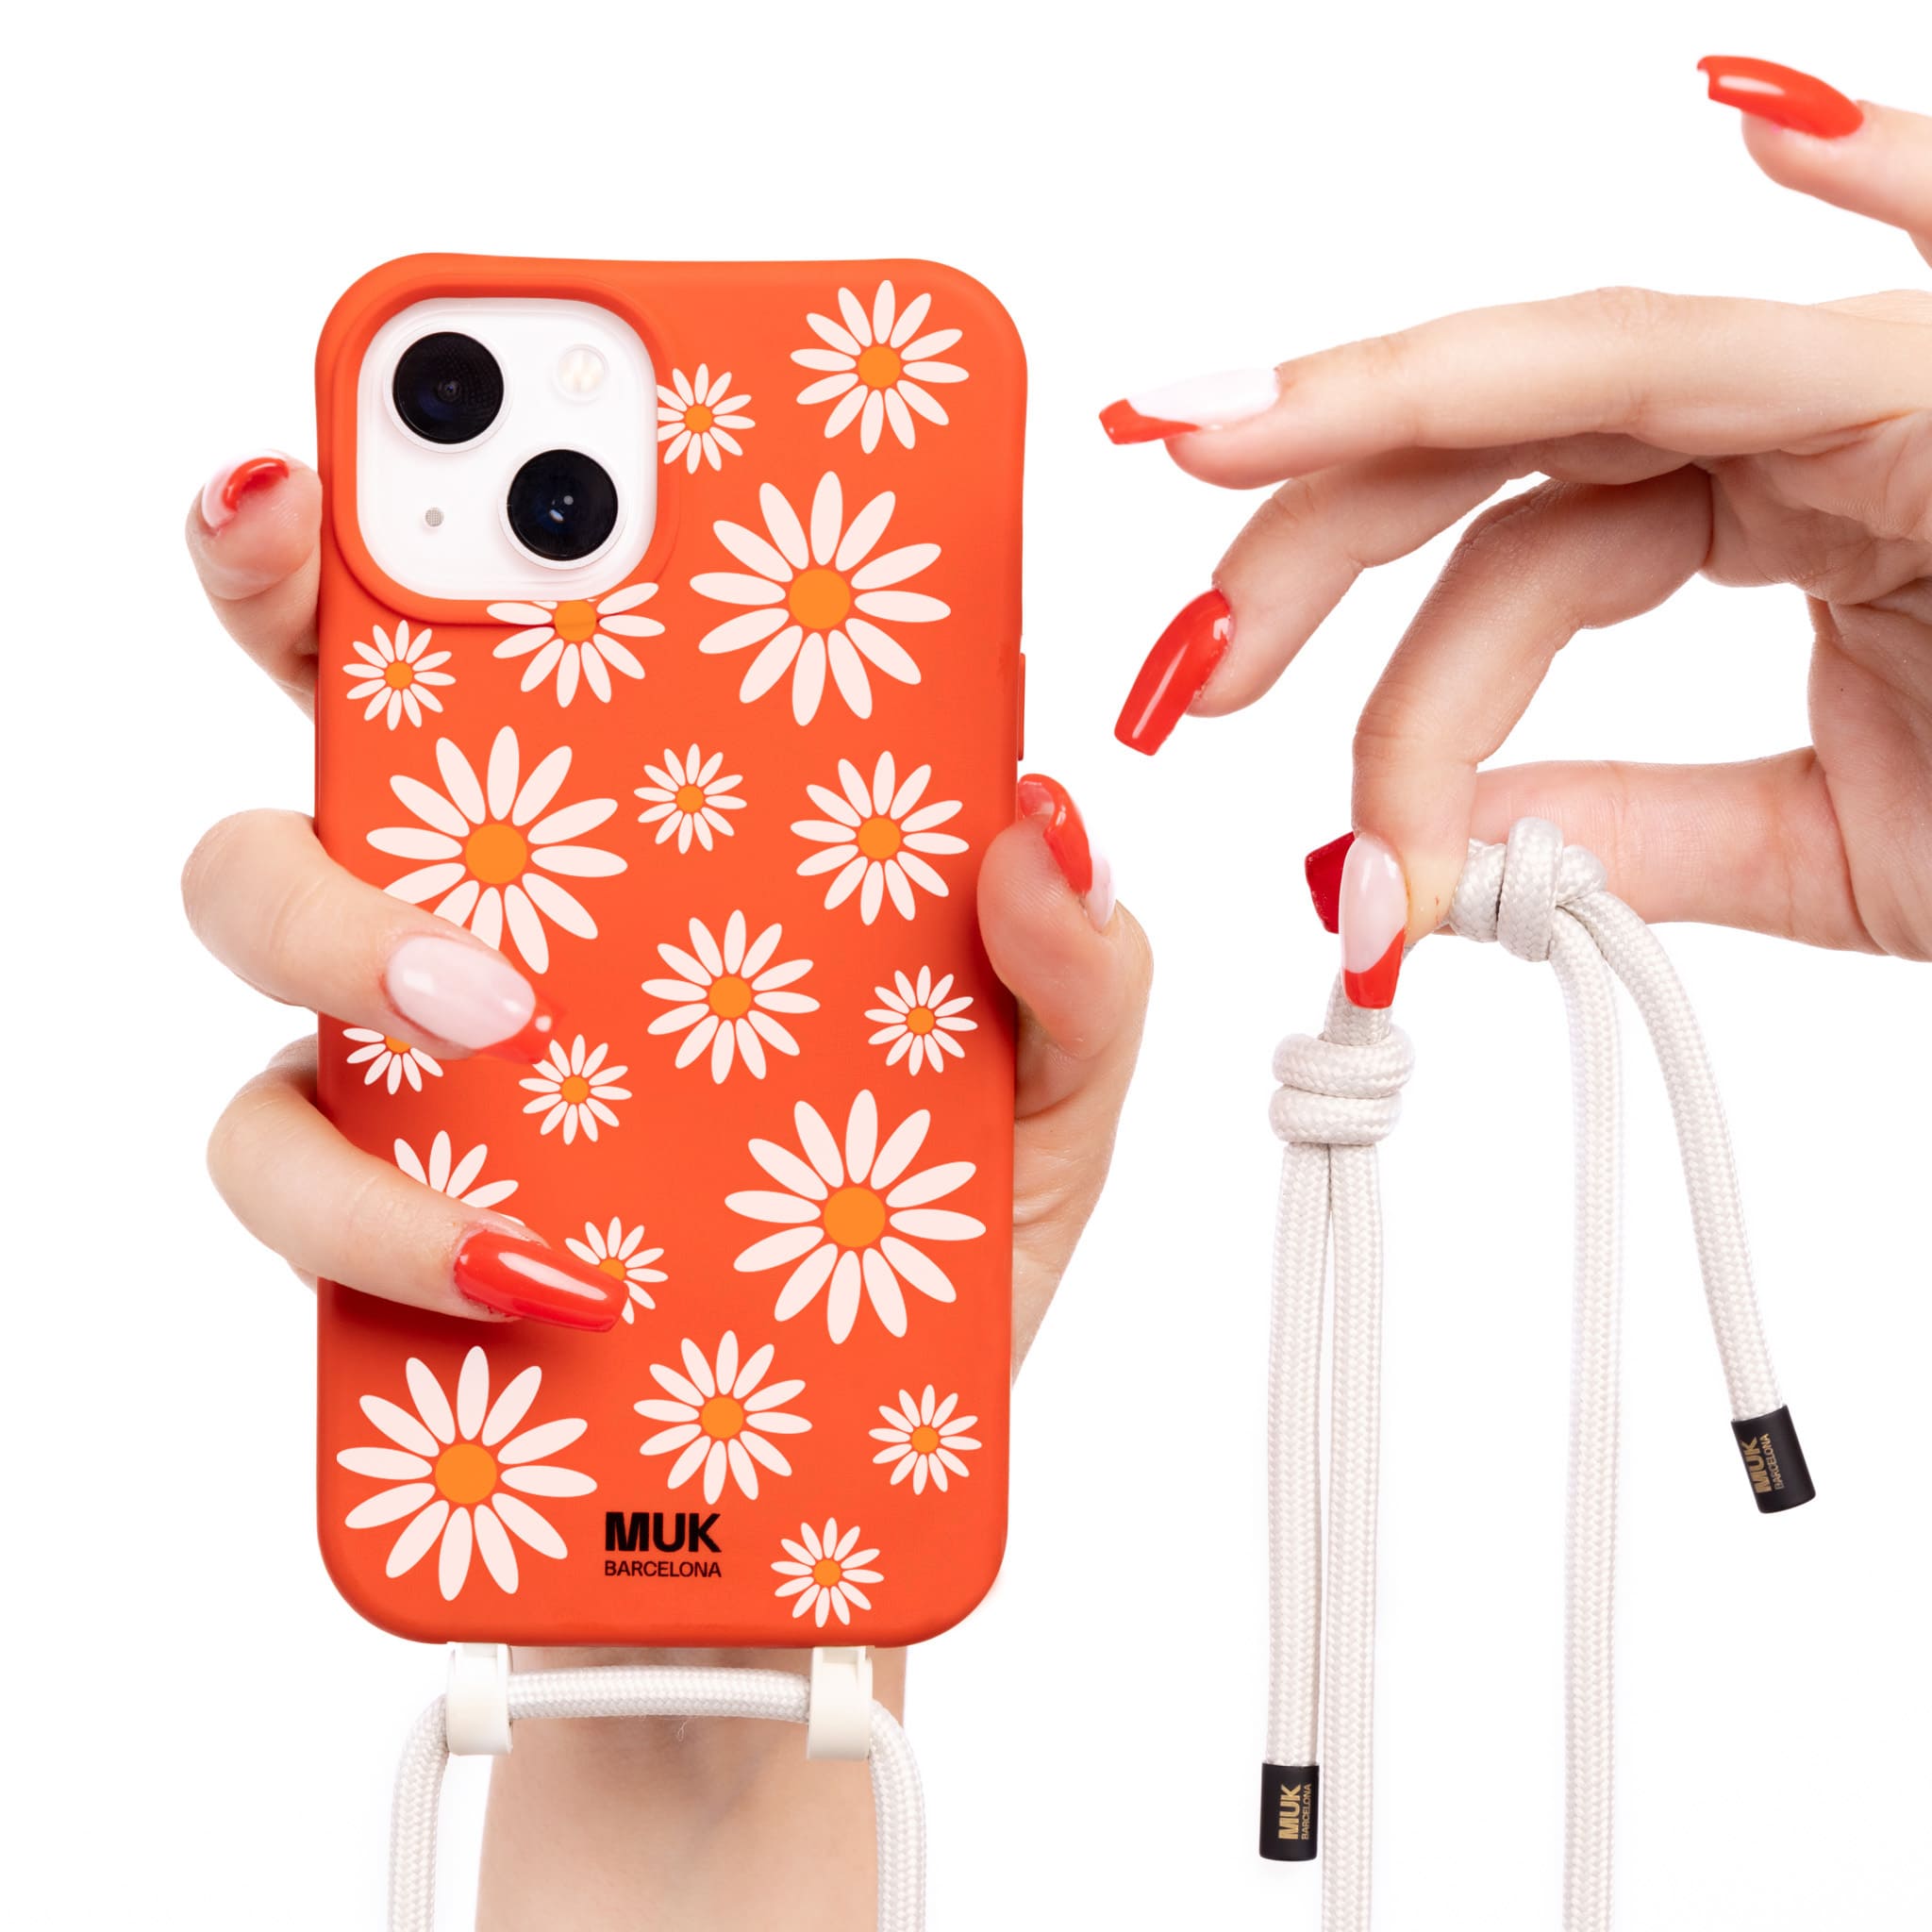 Daisies mobile phone case - Tile